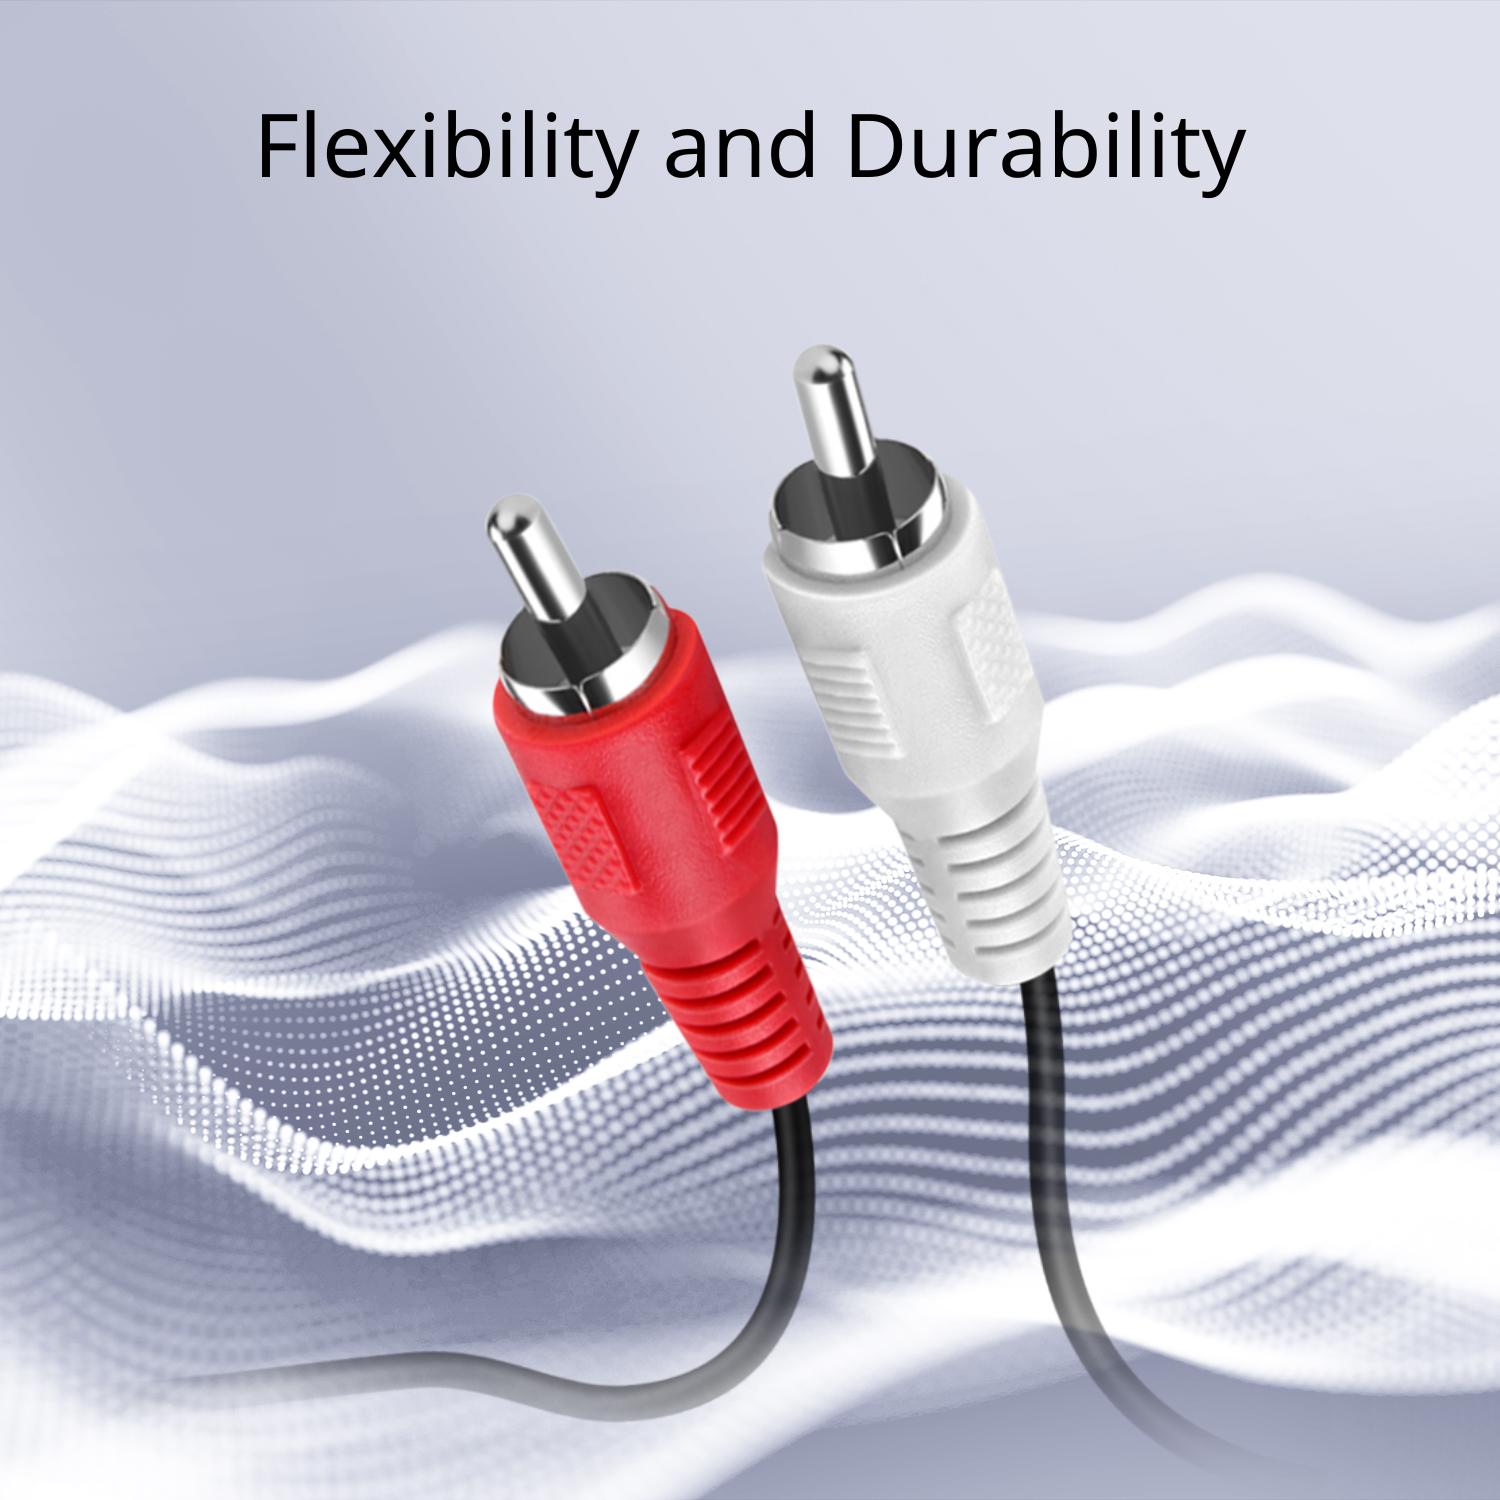 2RCA Stereo Audio Cable (10 Feet) - Dual Composite RCA Male Connector M/M 2 Channel (Right and Left) (Red and White) Shielded 2RCA to 2RCA AV Sound Plug Jack Wire Cord - image 3 of 6